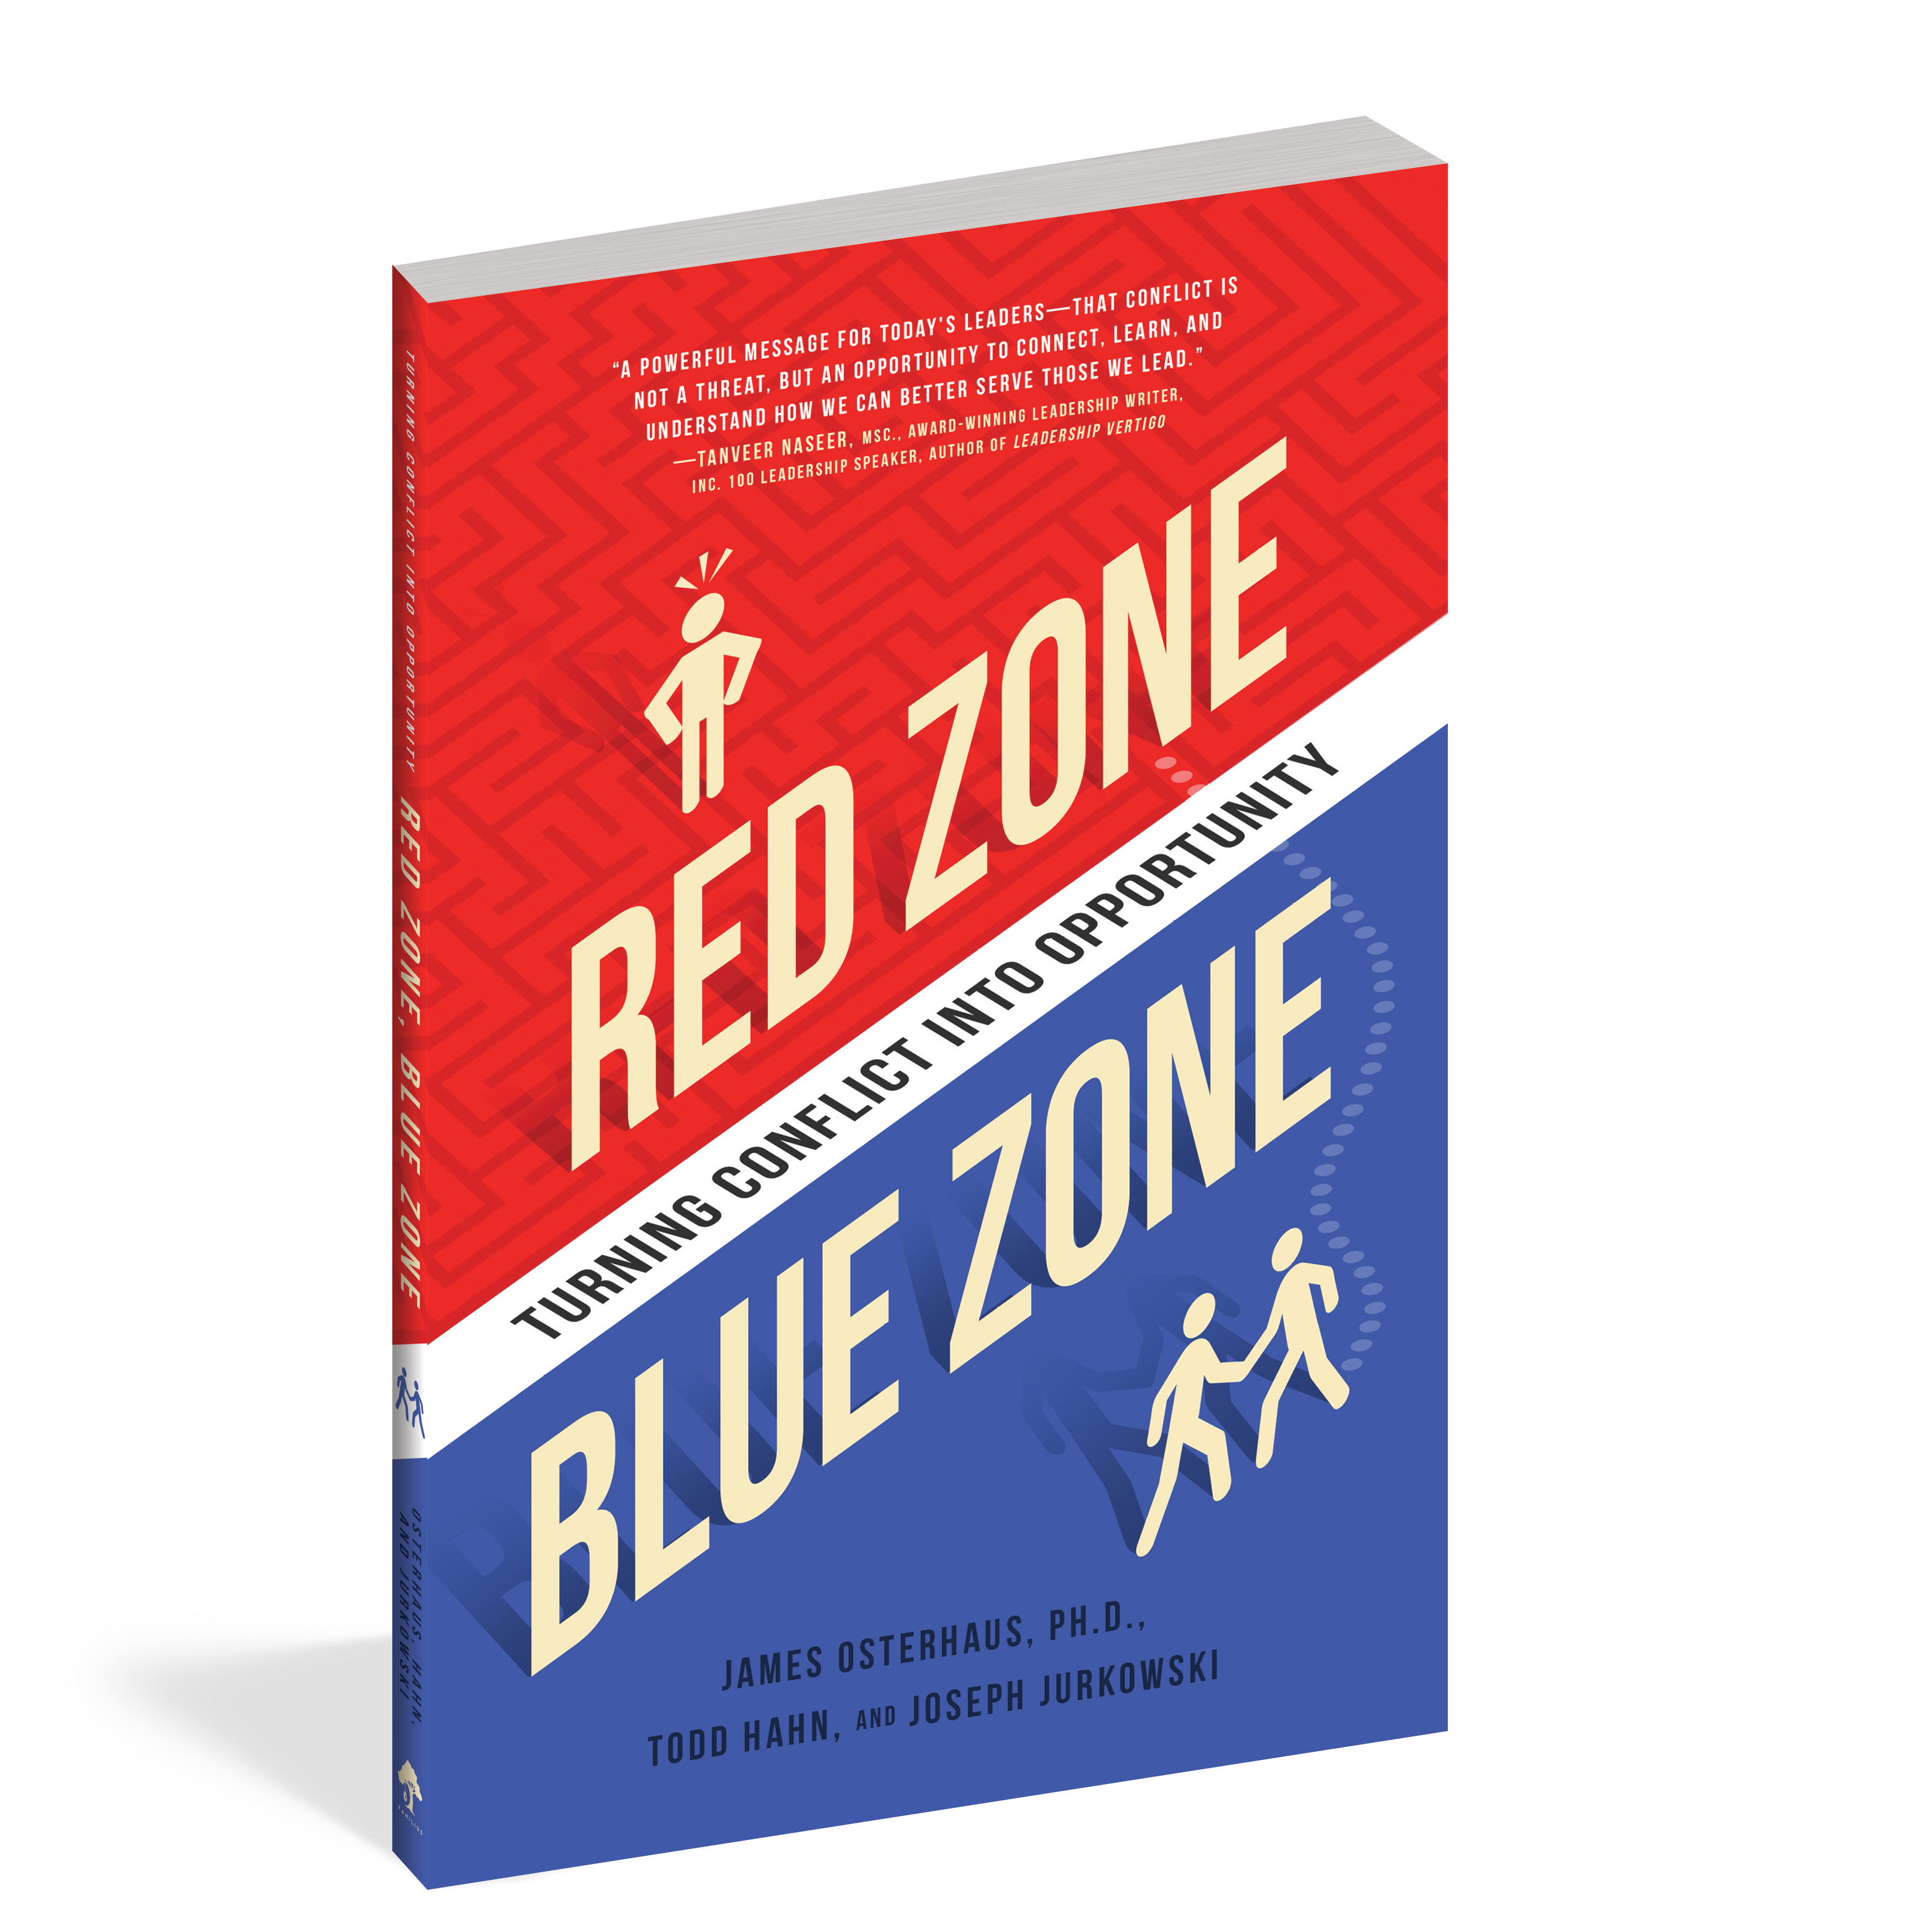 The cover of the book Red Zone, Blue Zone.